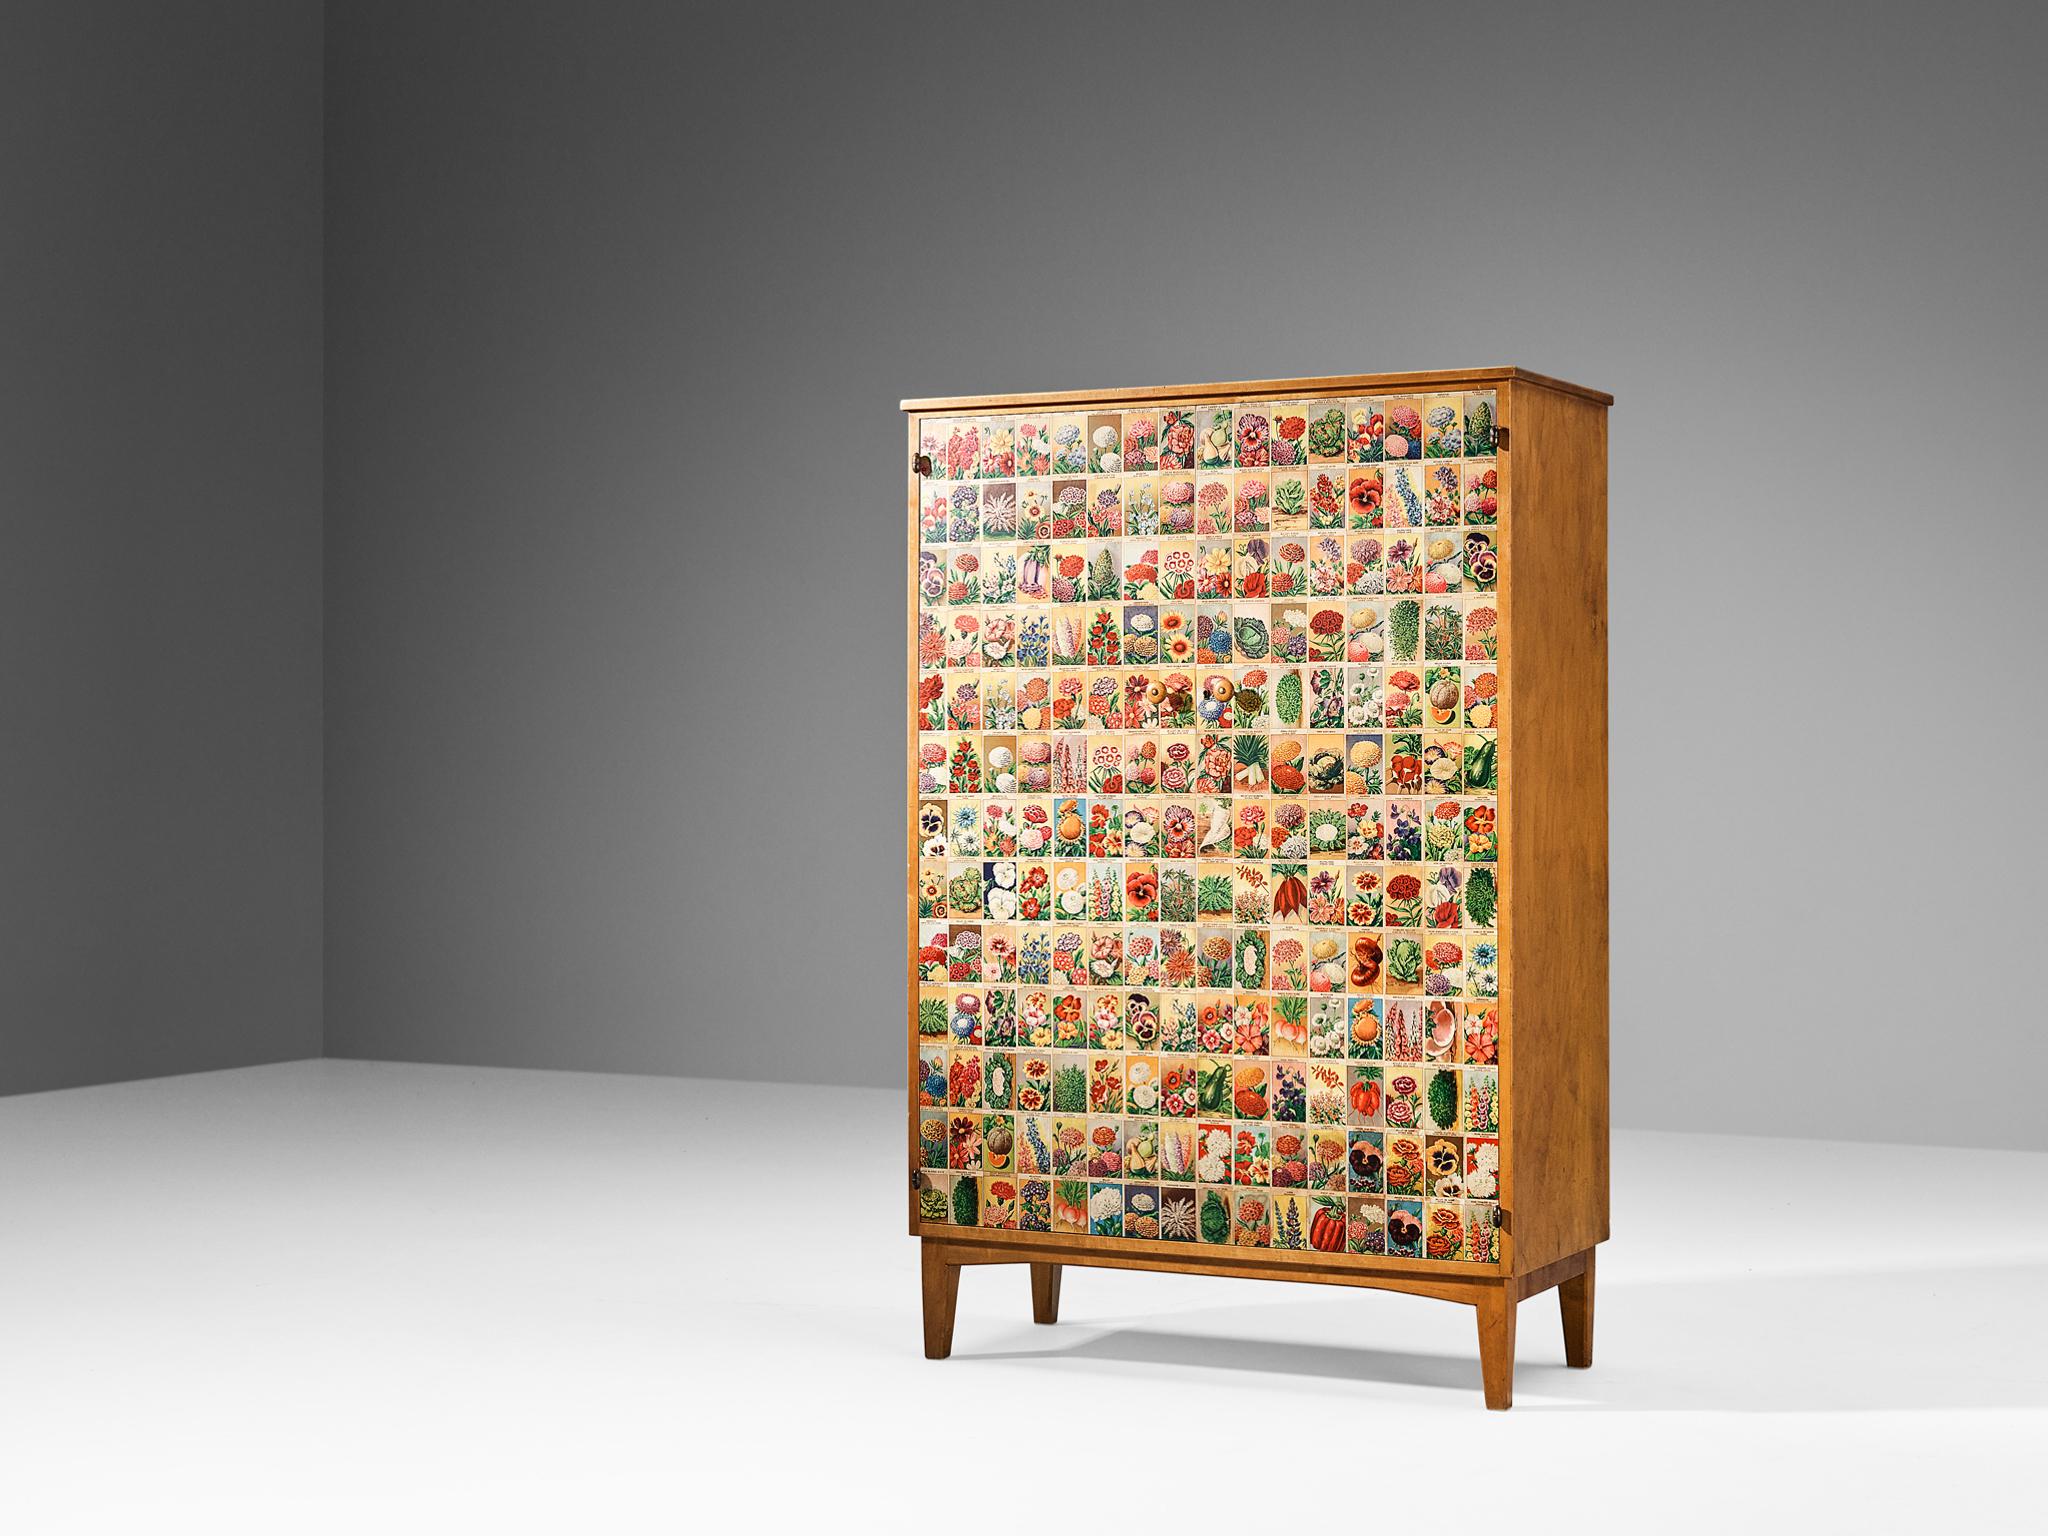 Elias Svedberg for Nordiska Kompaniet, cabinet, maple, paper, Sweden, 1940

A stunning and graphic cabinet designed by Elias Svedberg and manufactured by Nordiska Kompaniet in 1940. This cabinet is a truly beautiful piece that gives an exciting